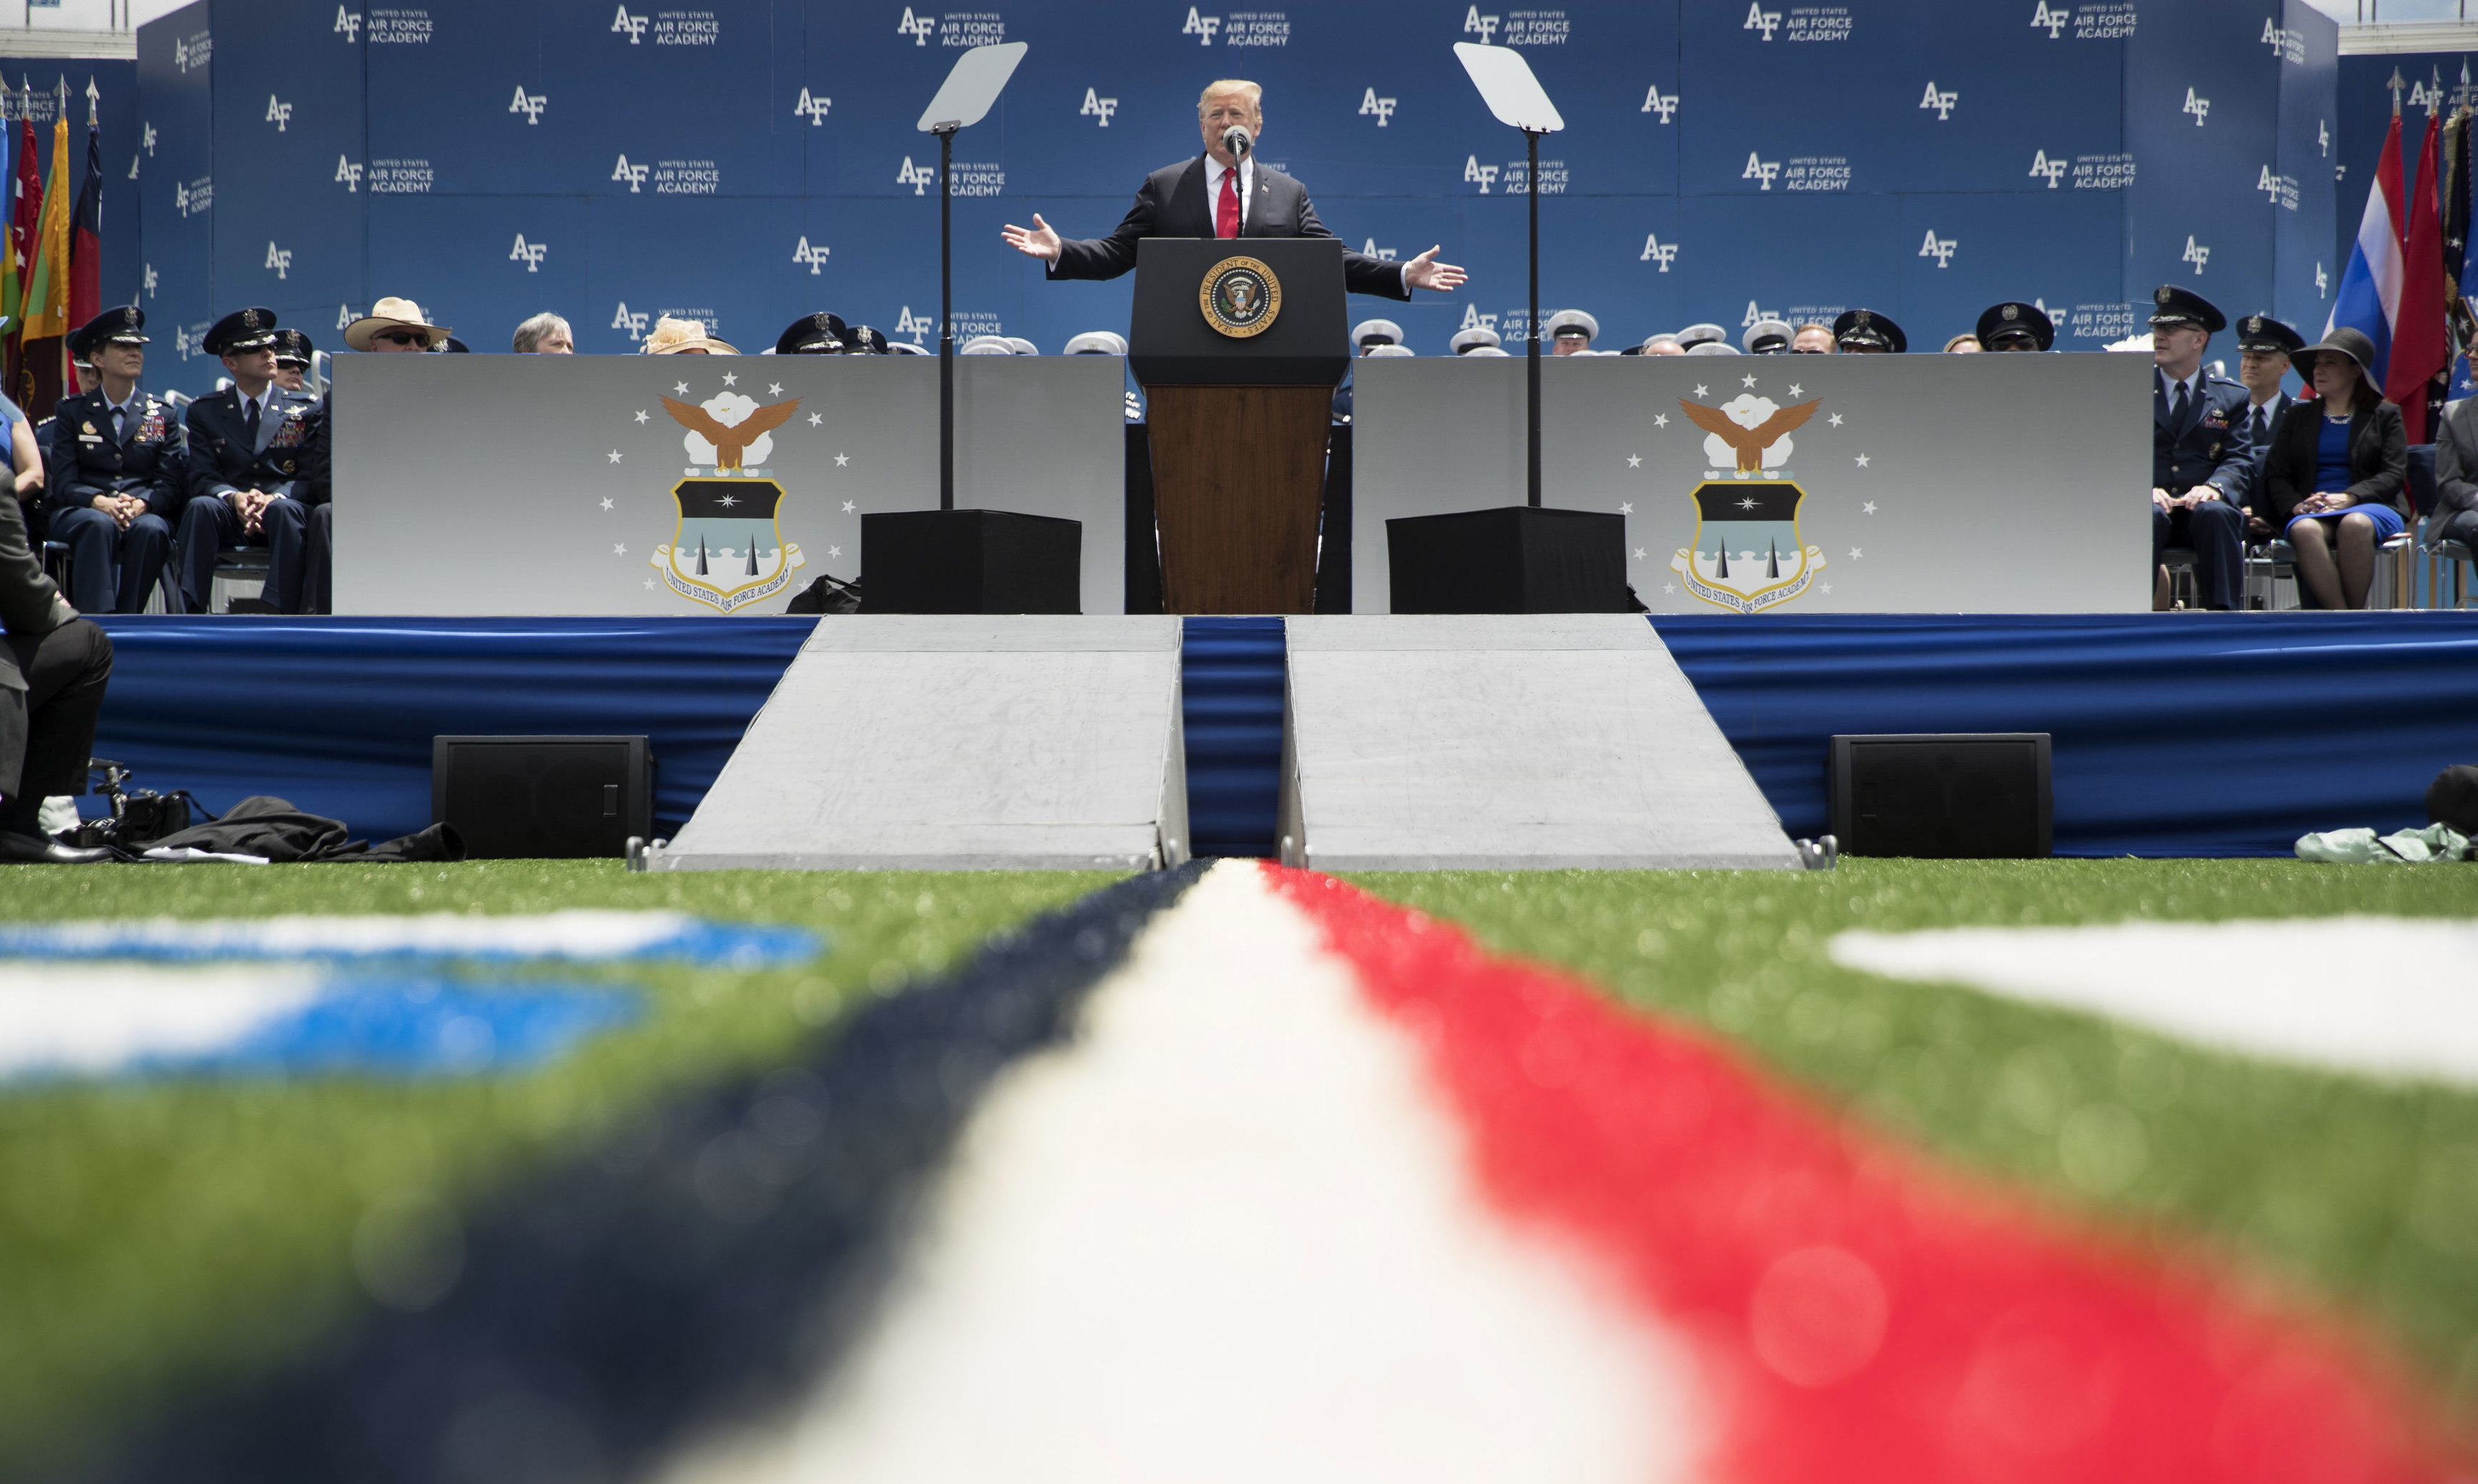 President Donald Trump speaks during the 2019 United States Air Force Academy Graduation Ceremony at Falcon Stadium.